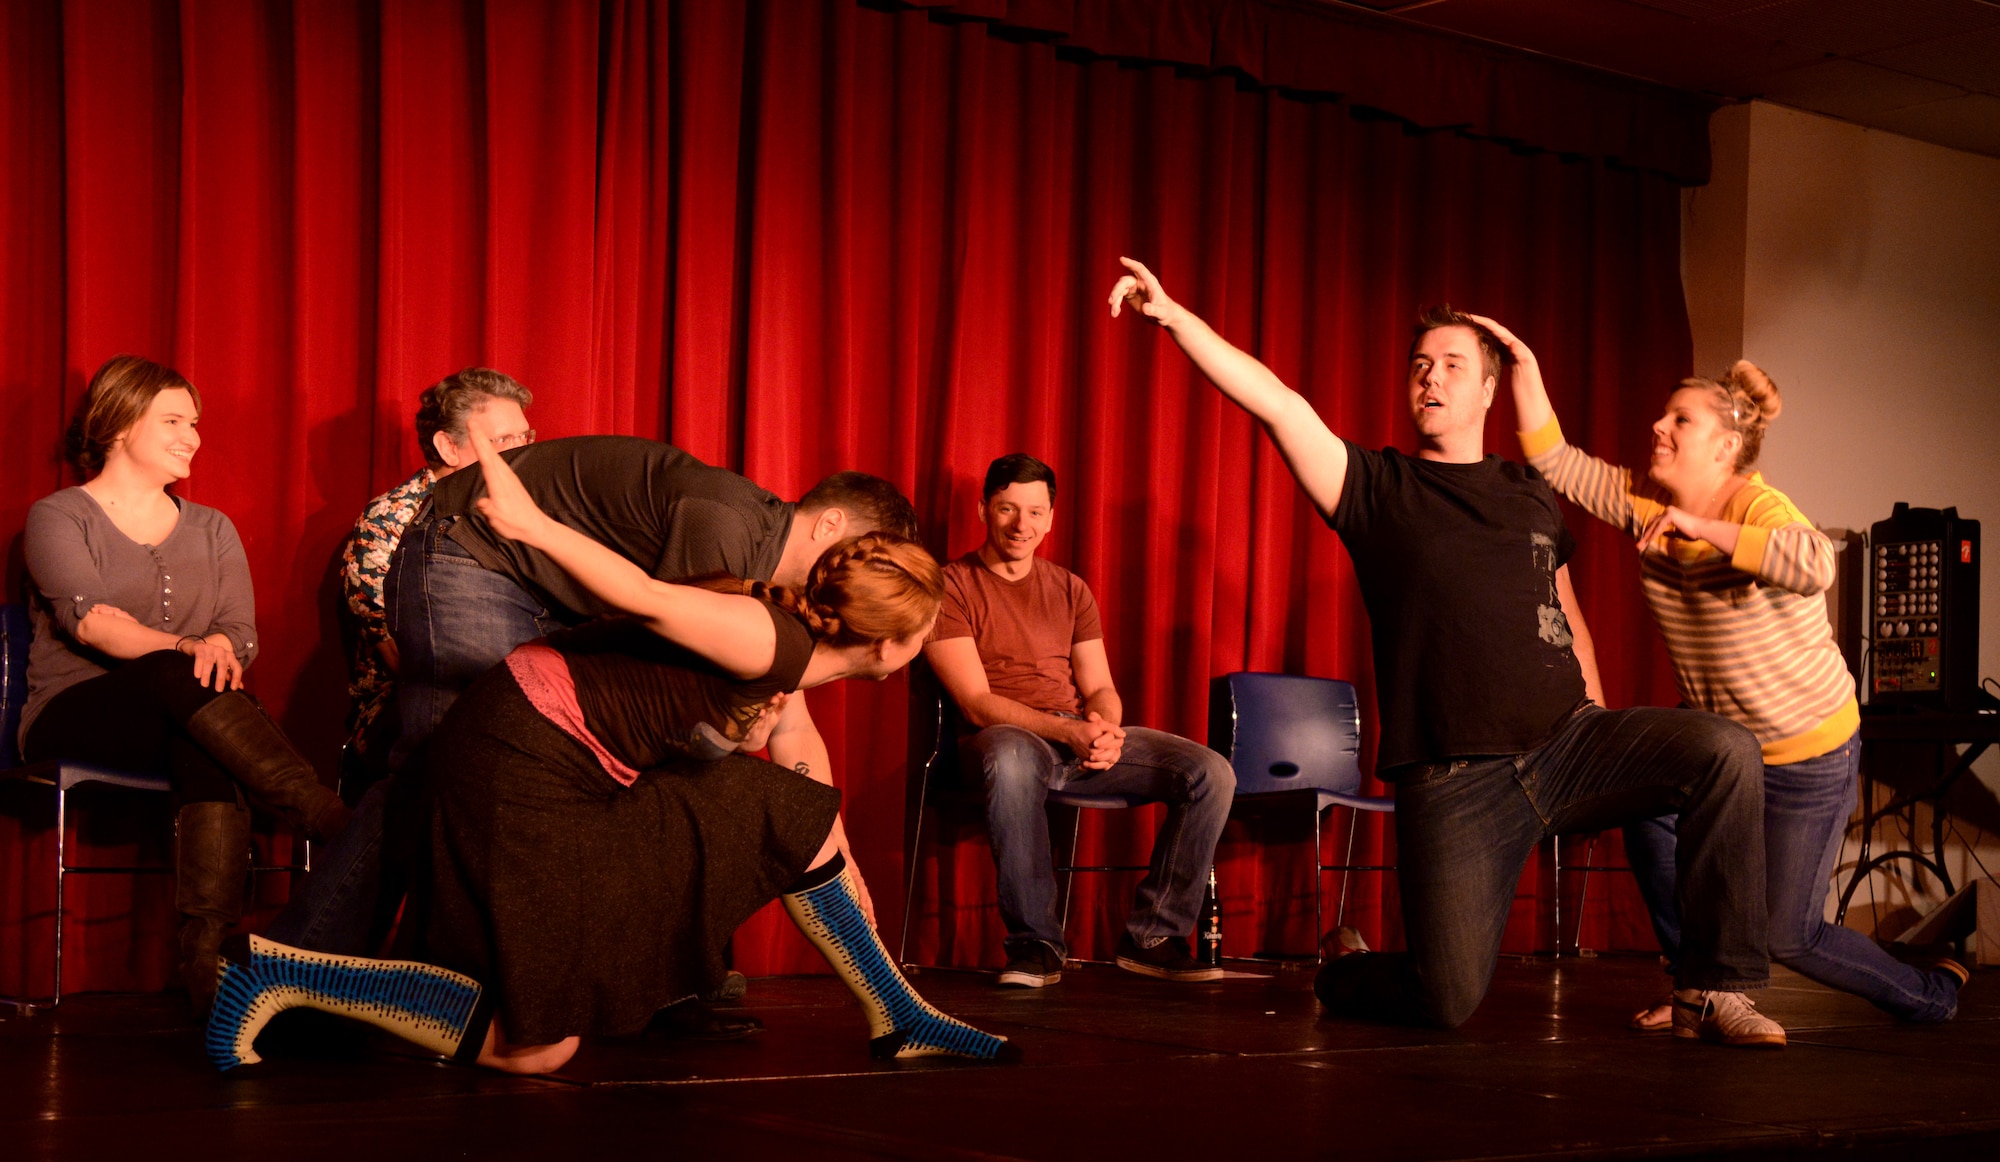 Members of the audience move Strike Force Comedy cast during an improv game of “New Year Nuttiness” at Ramstein Air Base, Germany, Jan. 24, 2015. New Year Nuttiness was modeled after a popular improv comedy TV show but made variations to some of the games typically played on the show. (U.S. Air Force photo/Senior Airman Timothy Moore)